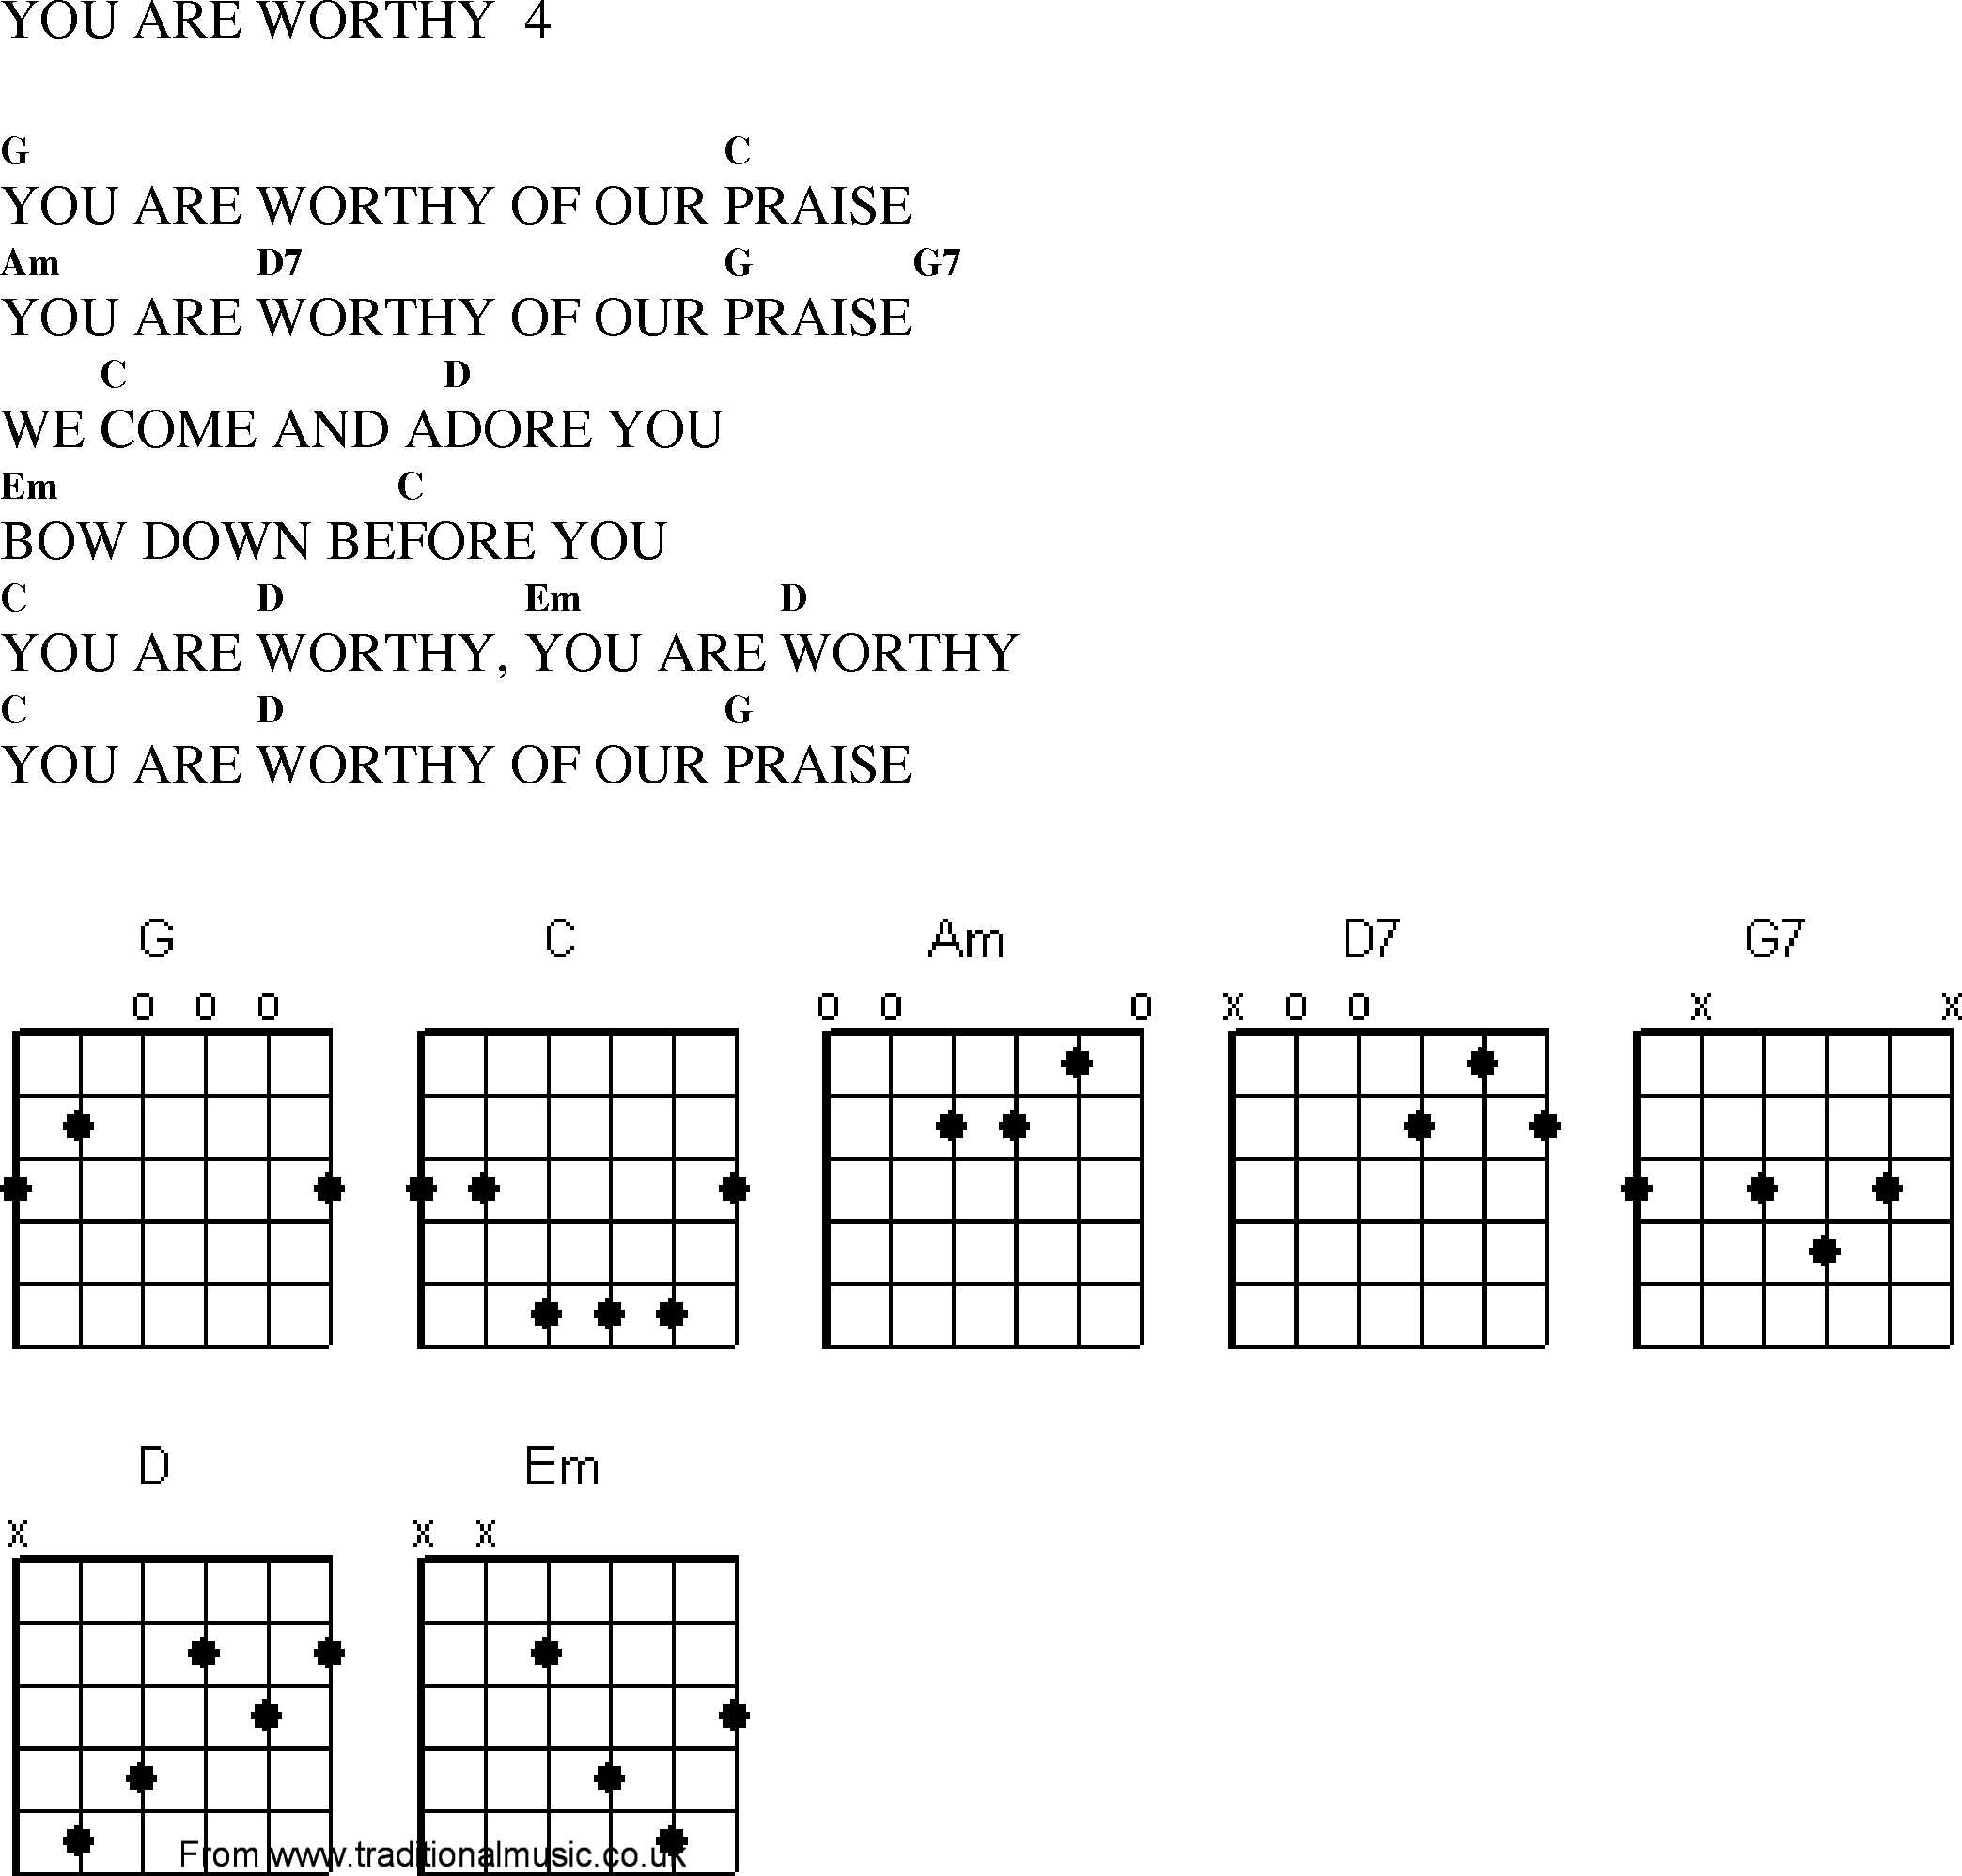 Gospel Song: you_are_worthy, lyrics and chords.